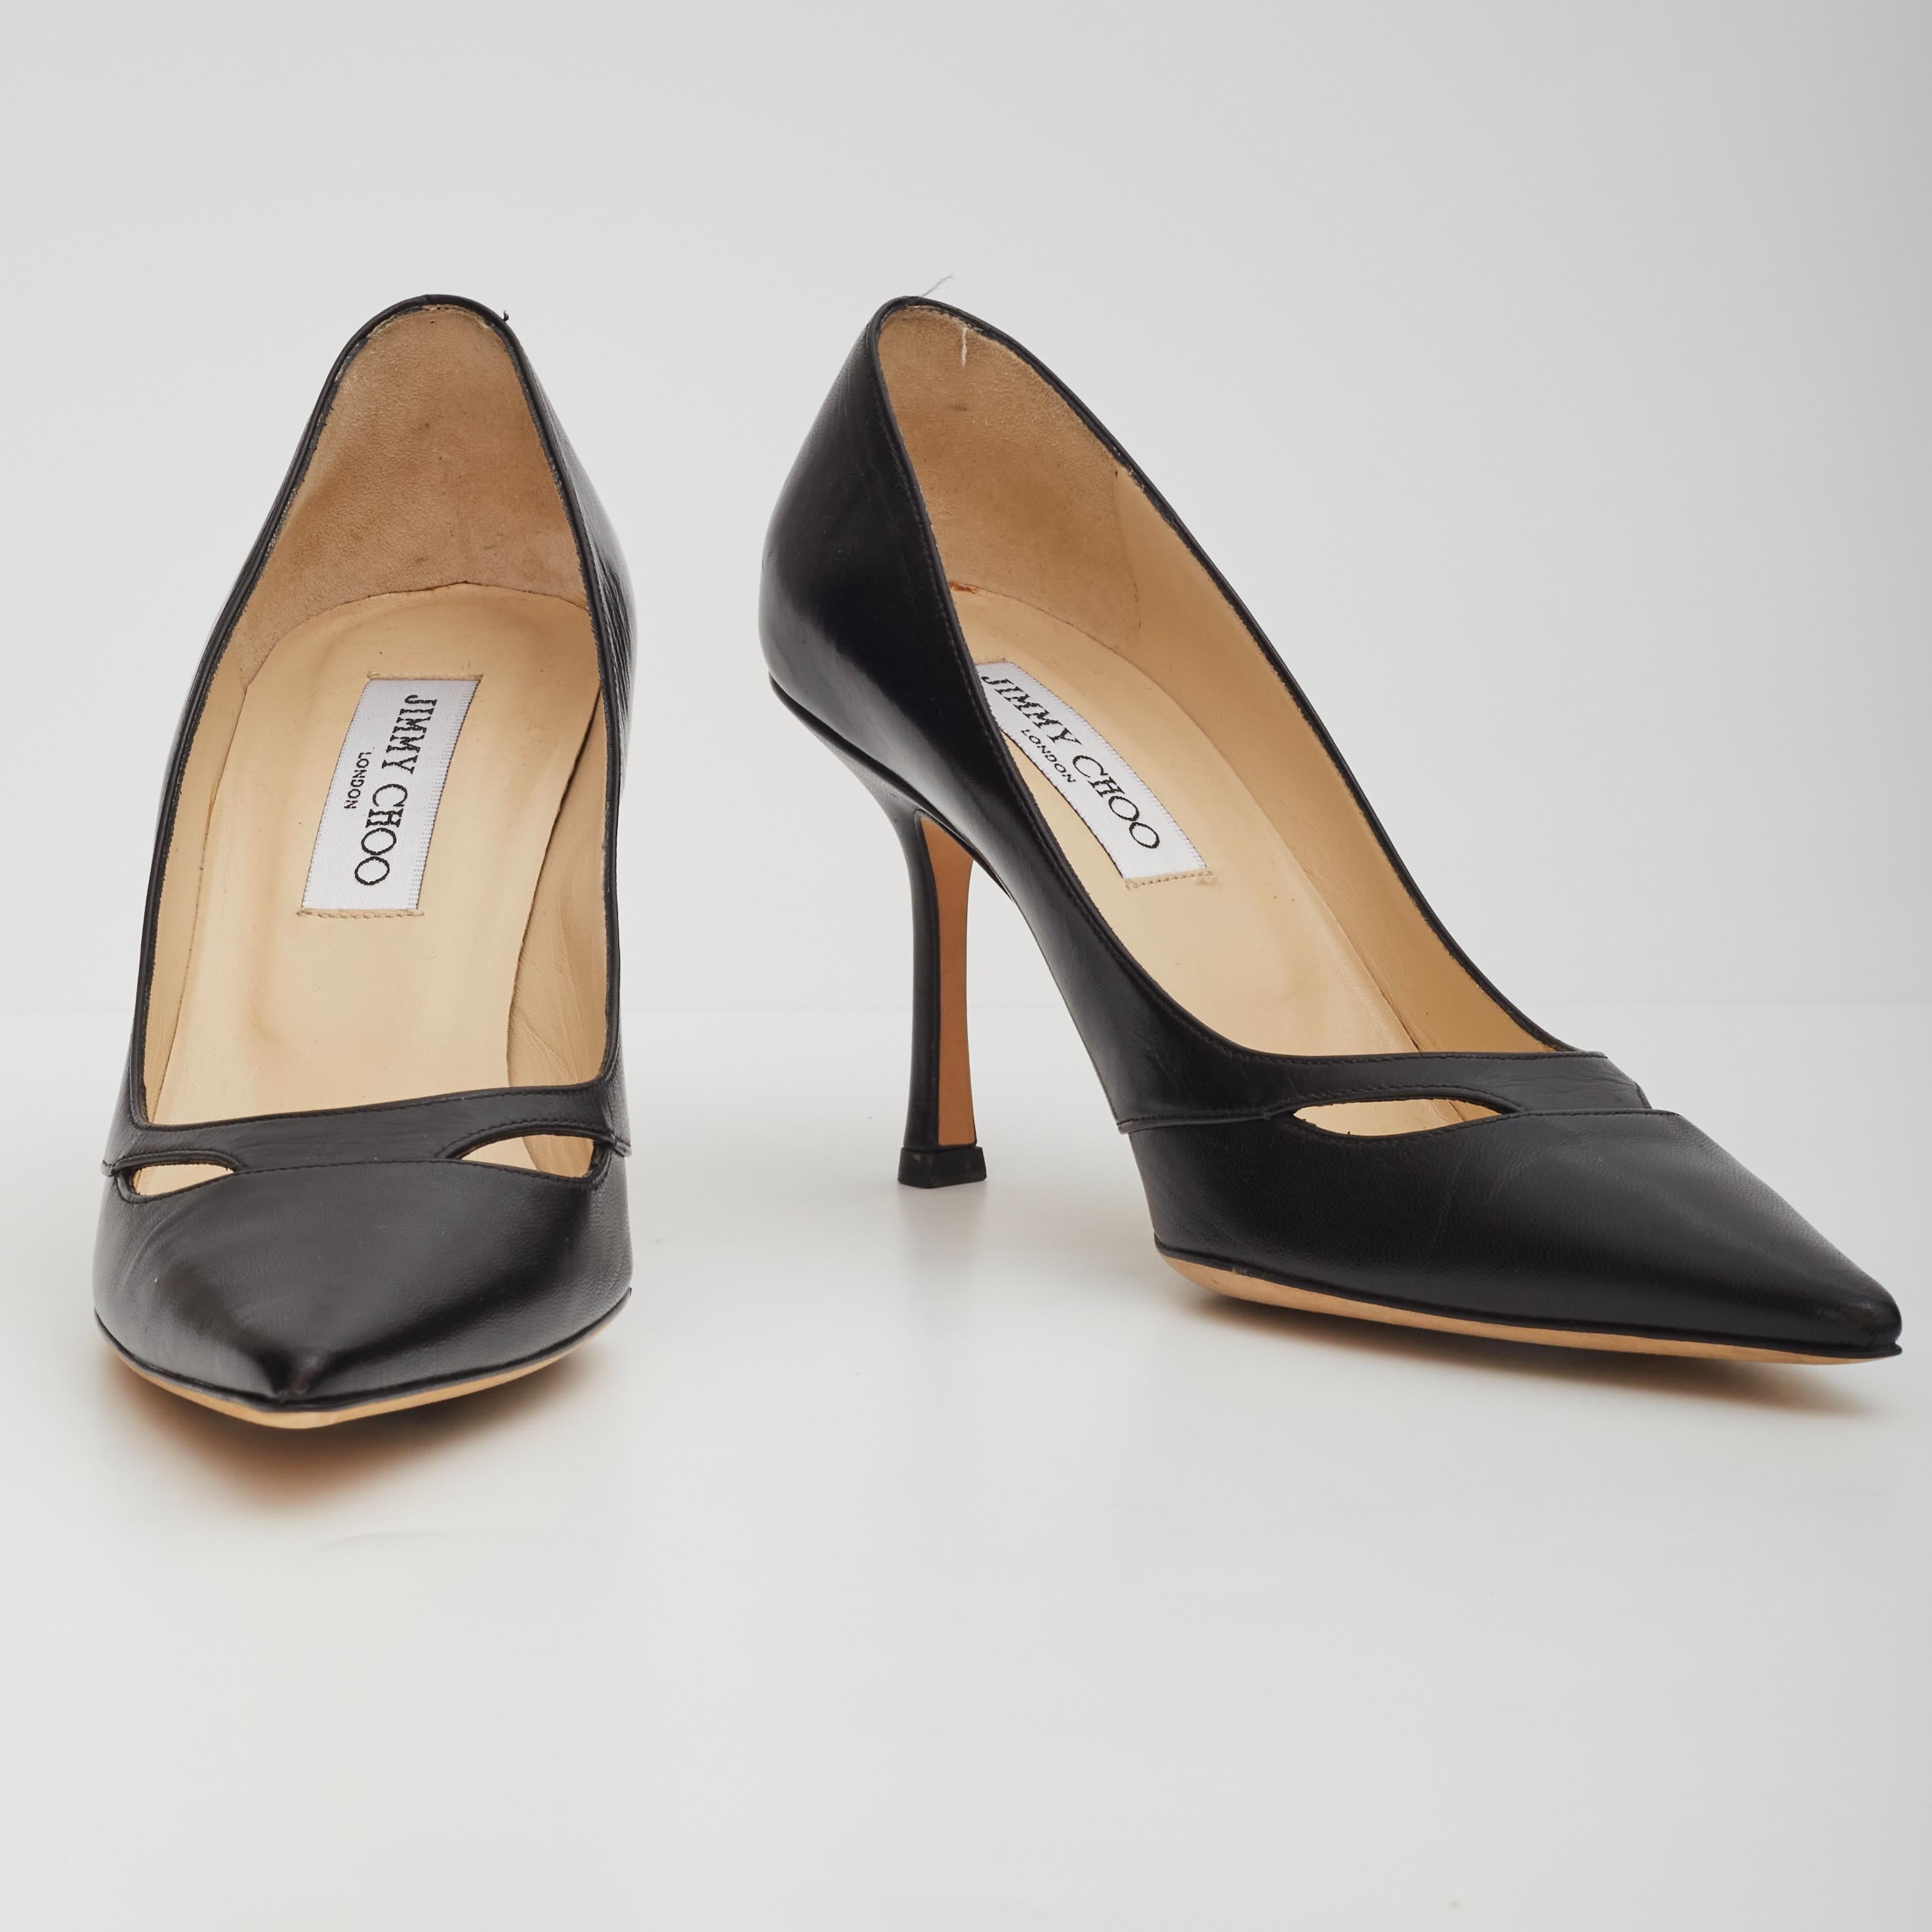 JThe classic pointy toe pump has been slightly updated with a softer point and a new stiletto heel. Leather lined with a leather sole, they are finished with a black kid leather upper. Made in Italy. Heel height measure 85mm/3.3 inches.

Color: